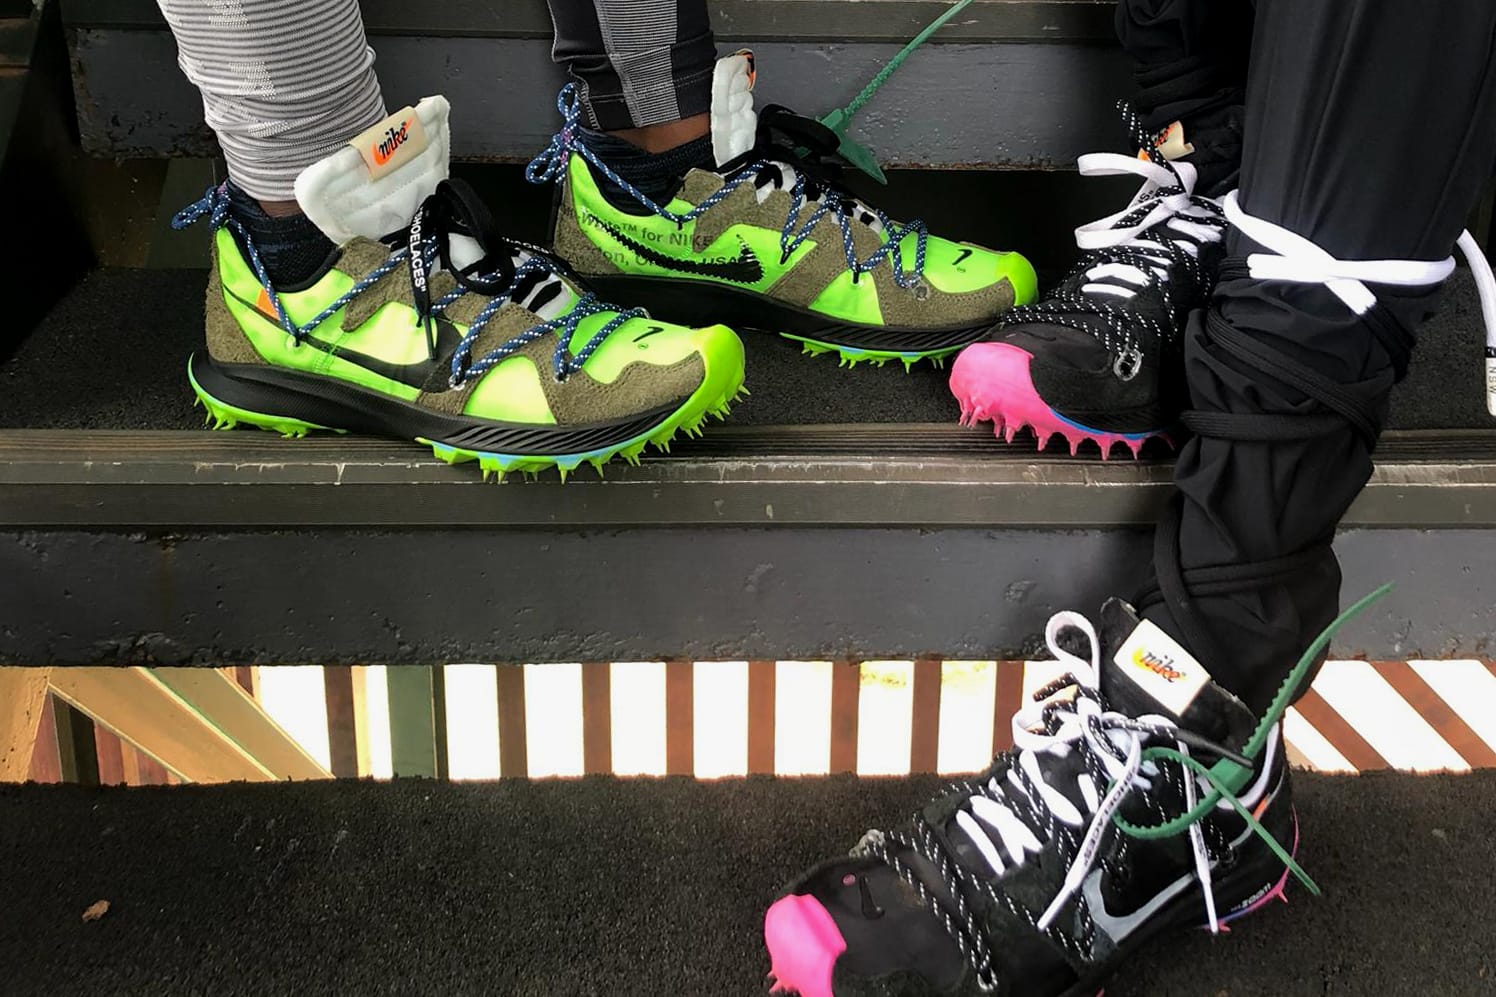 Virgil Abloh Teases New Nike Collab at 